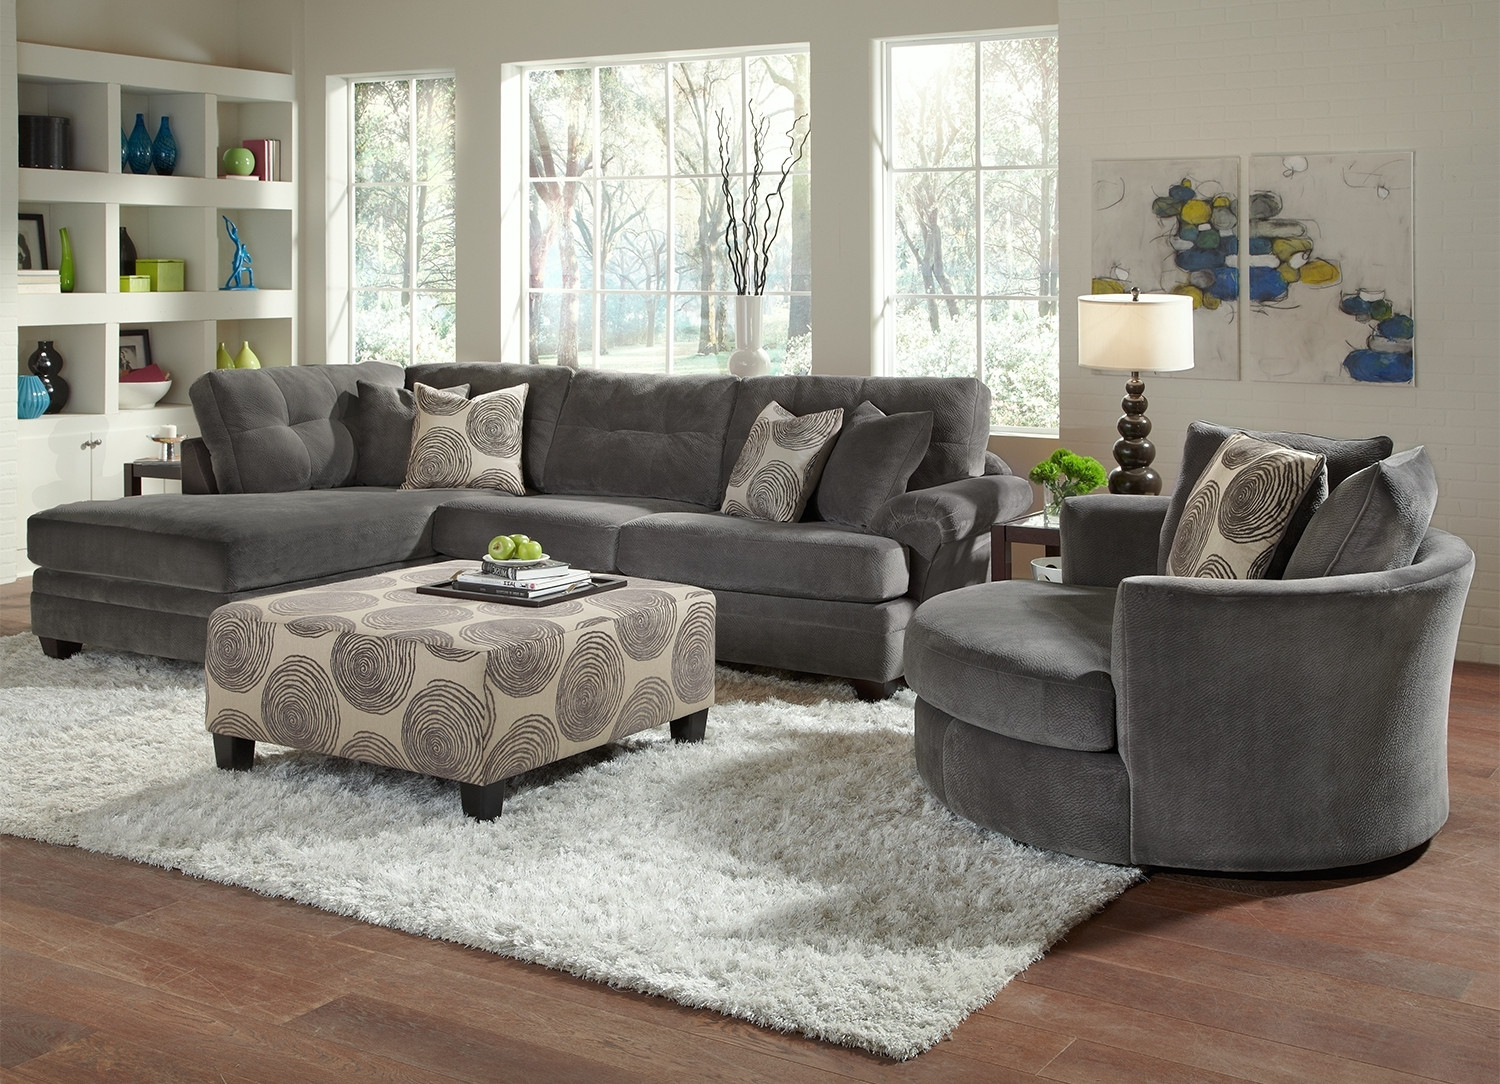 Cheap Modern Living Room Furniture
 Tips to Buy Swivel Chairs for Living Room